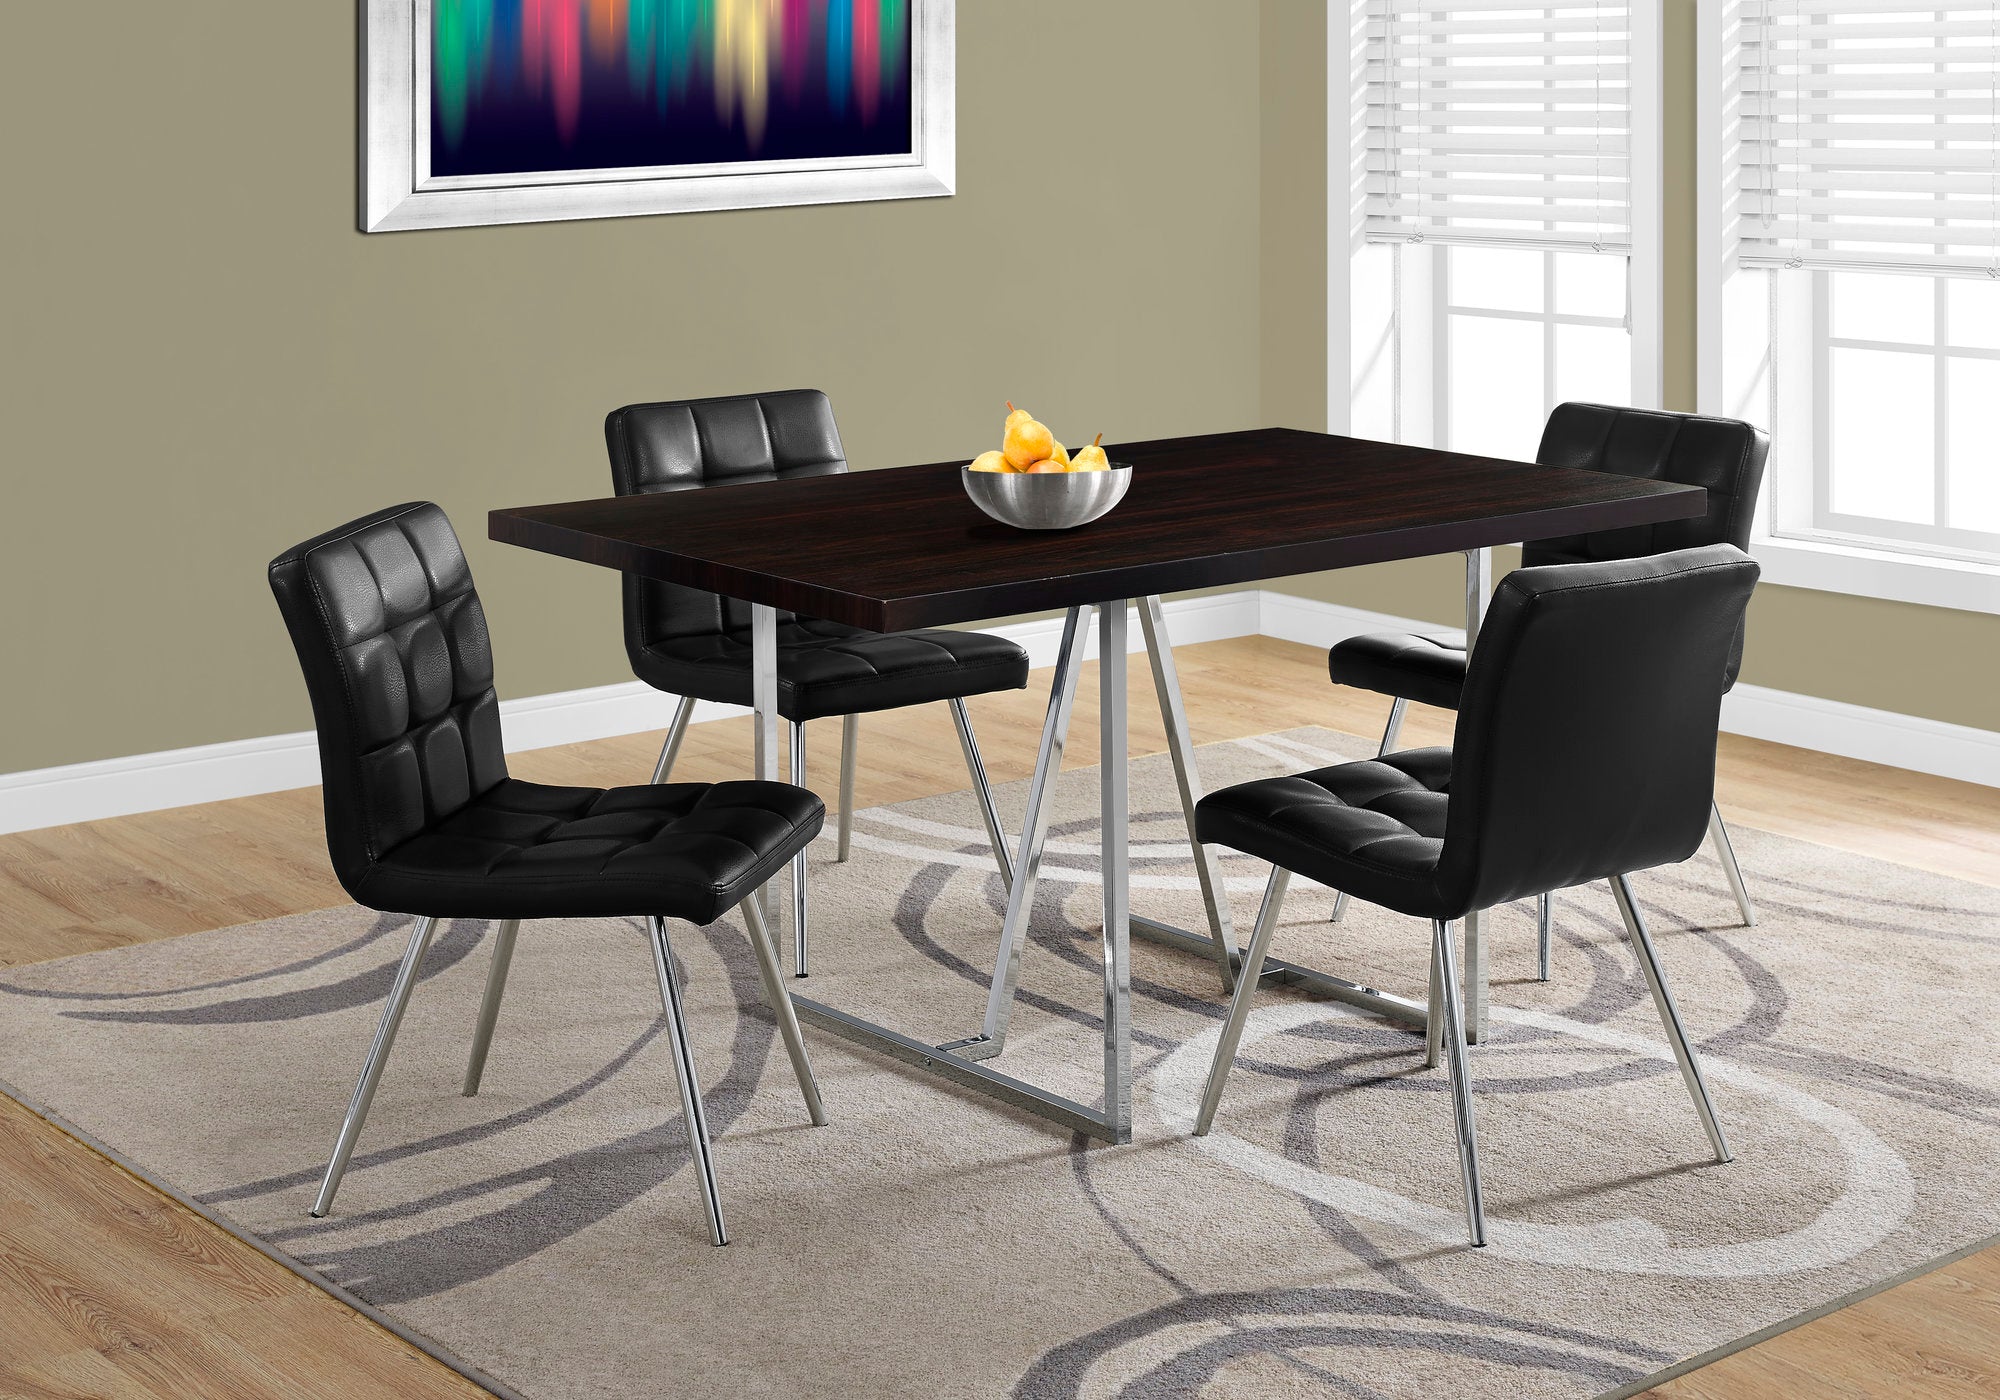 Modern Home Dining Table - 36"X 60" With U-Shaped Legs (Espresso)